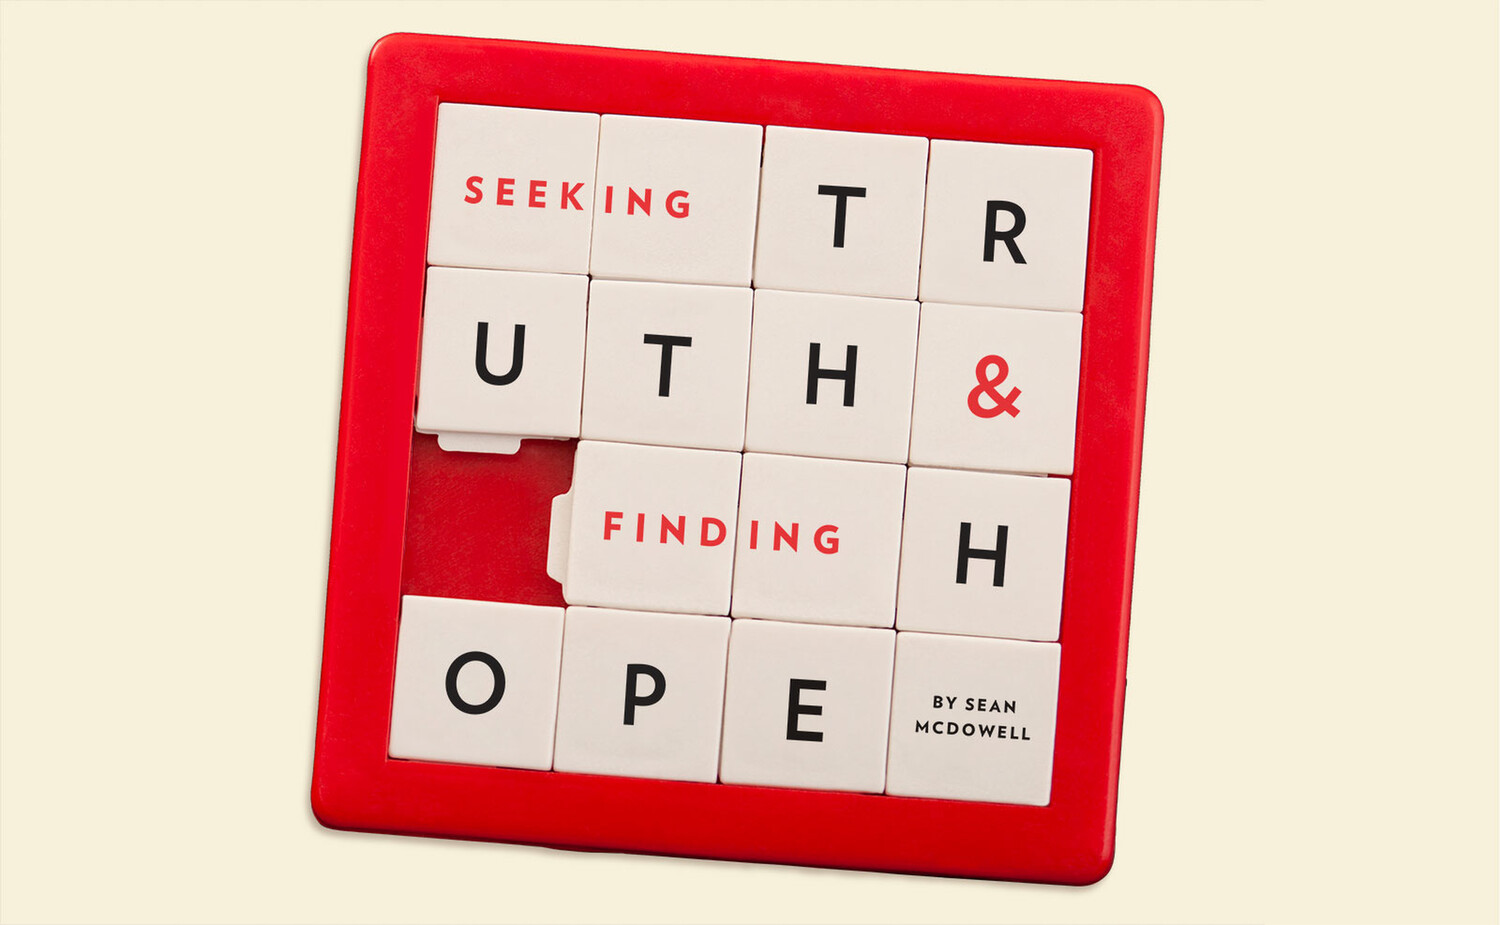 Seeking Truth and Finding Hope